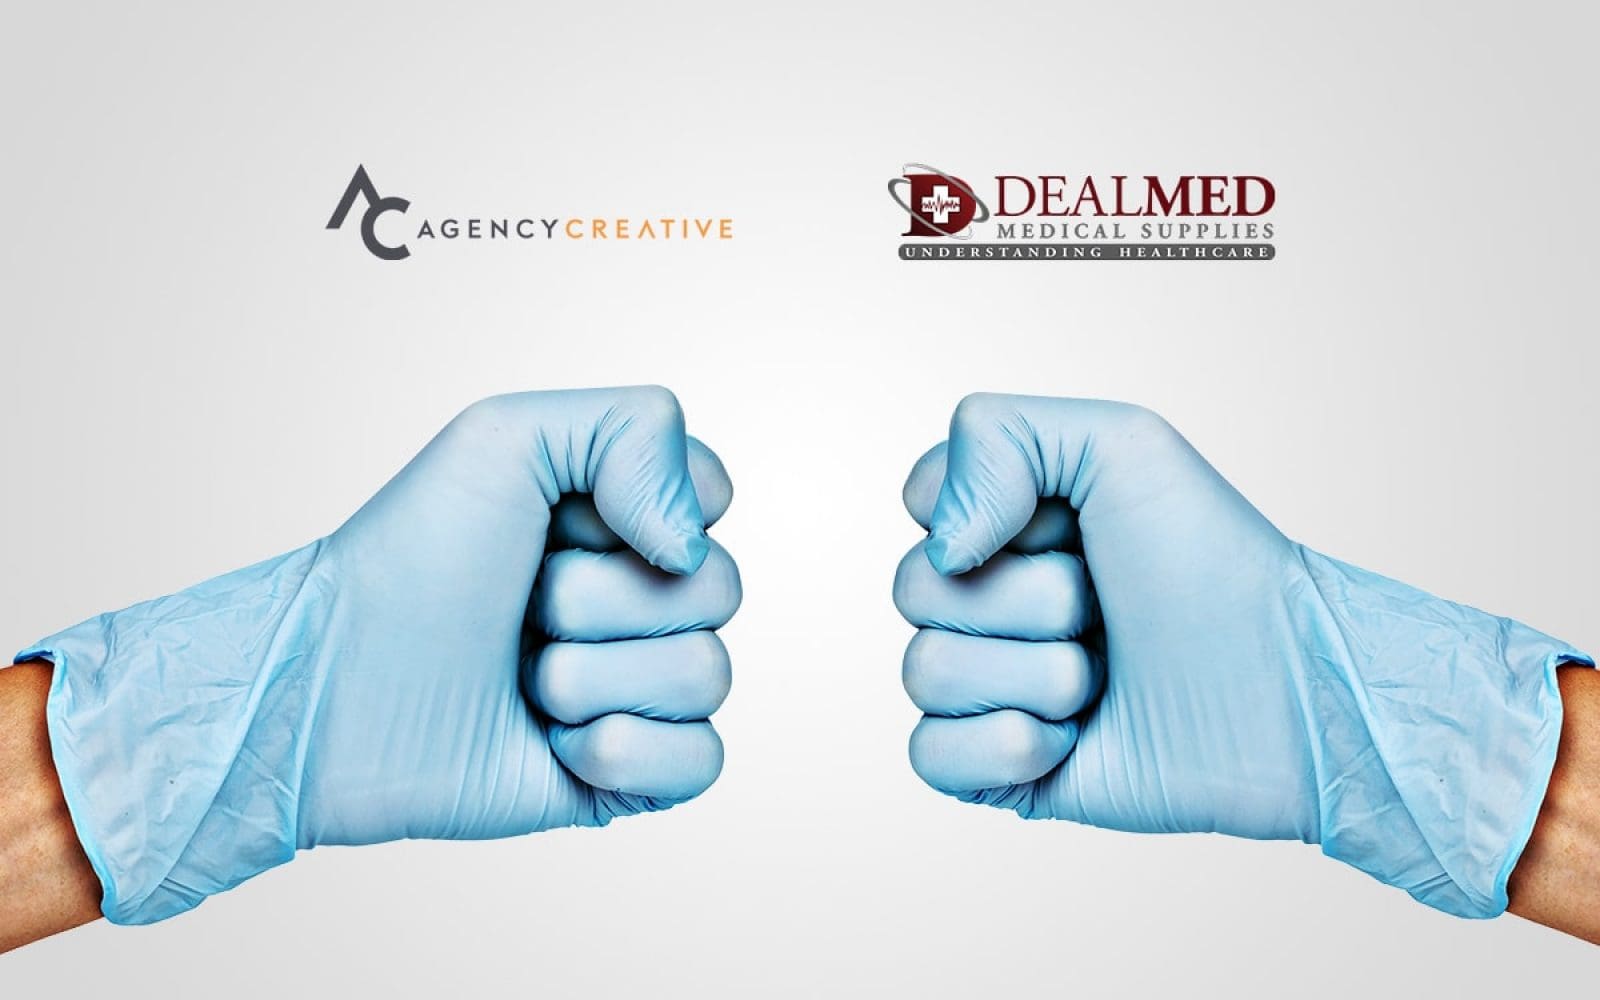 Healthcare Marketer Agency Creative Announces New Deal with Dealmed Medical Supplies